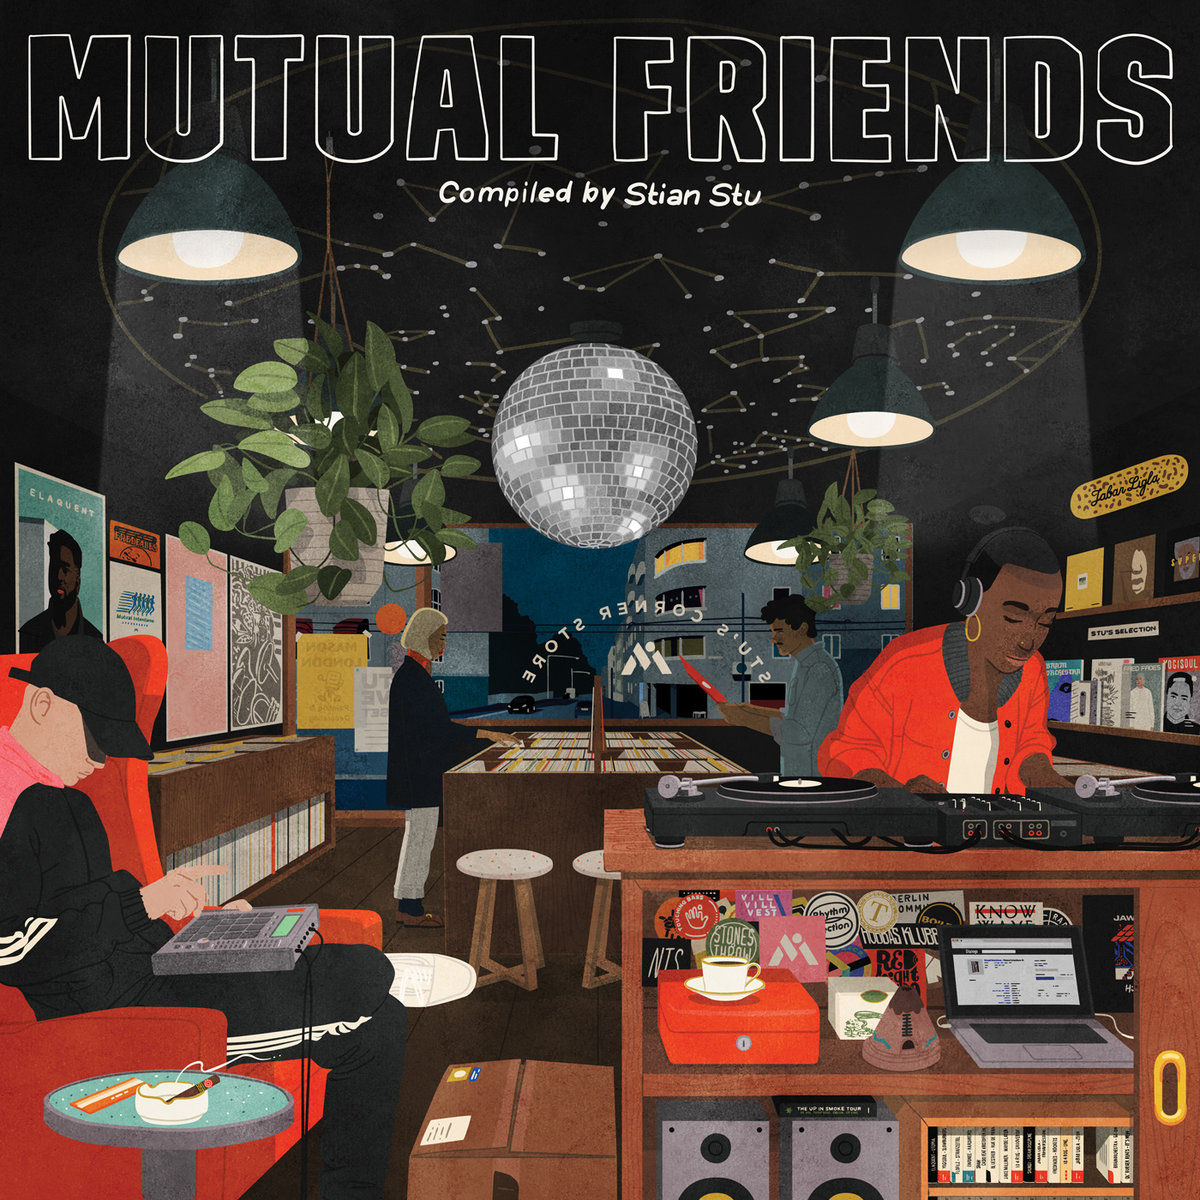 Mutual Intentions presents new compilation "Mutual Friends"